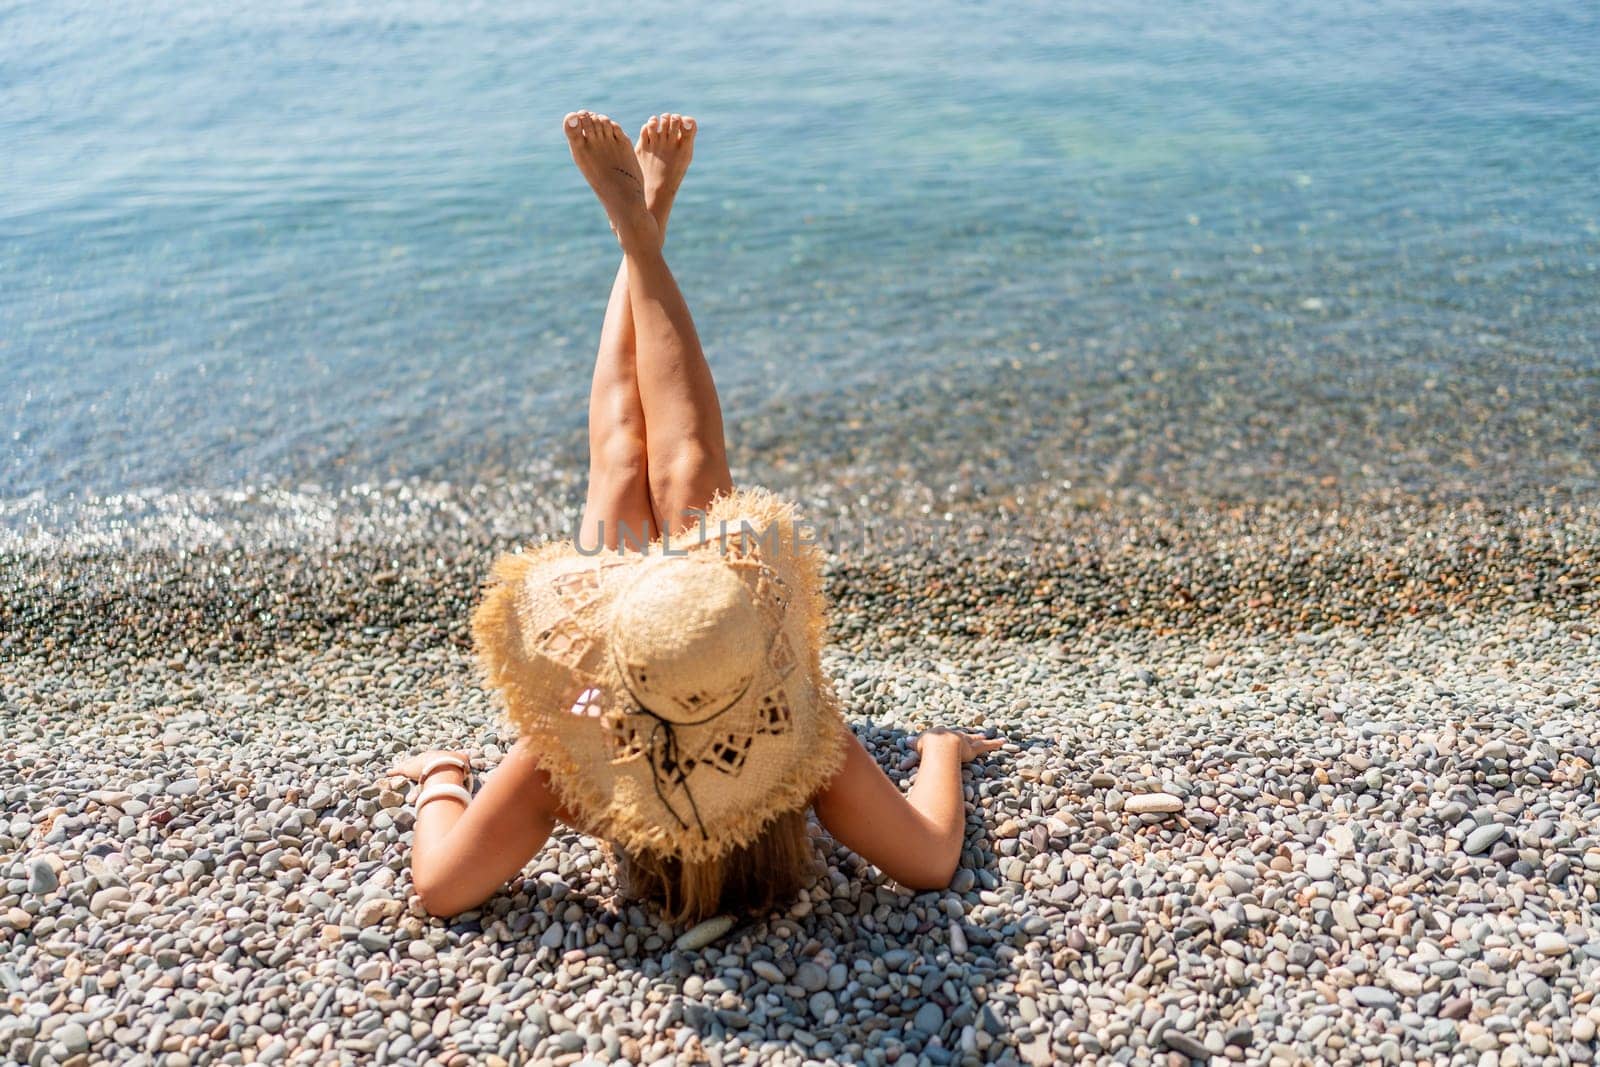 Beach Relaxation woman lies on a pebble beach, legs raised, and arms spread out. The concept of travel, vacation at sea.